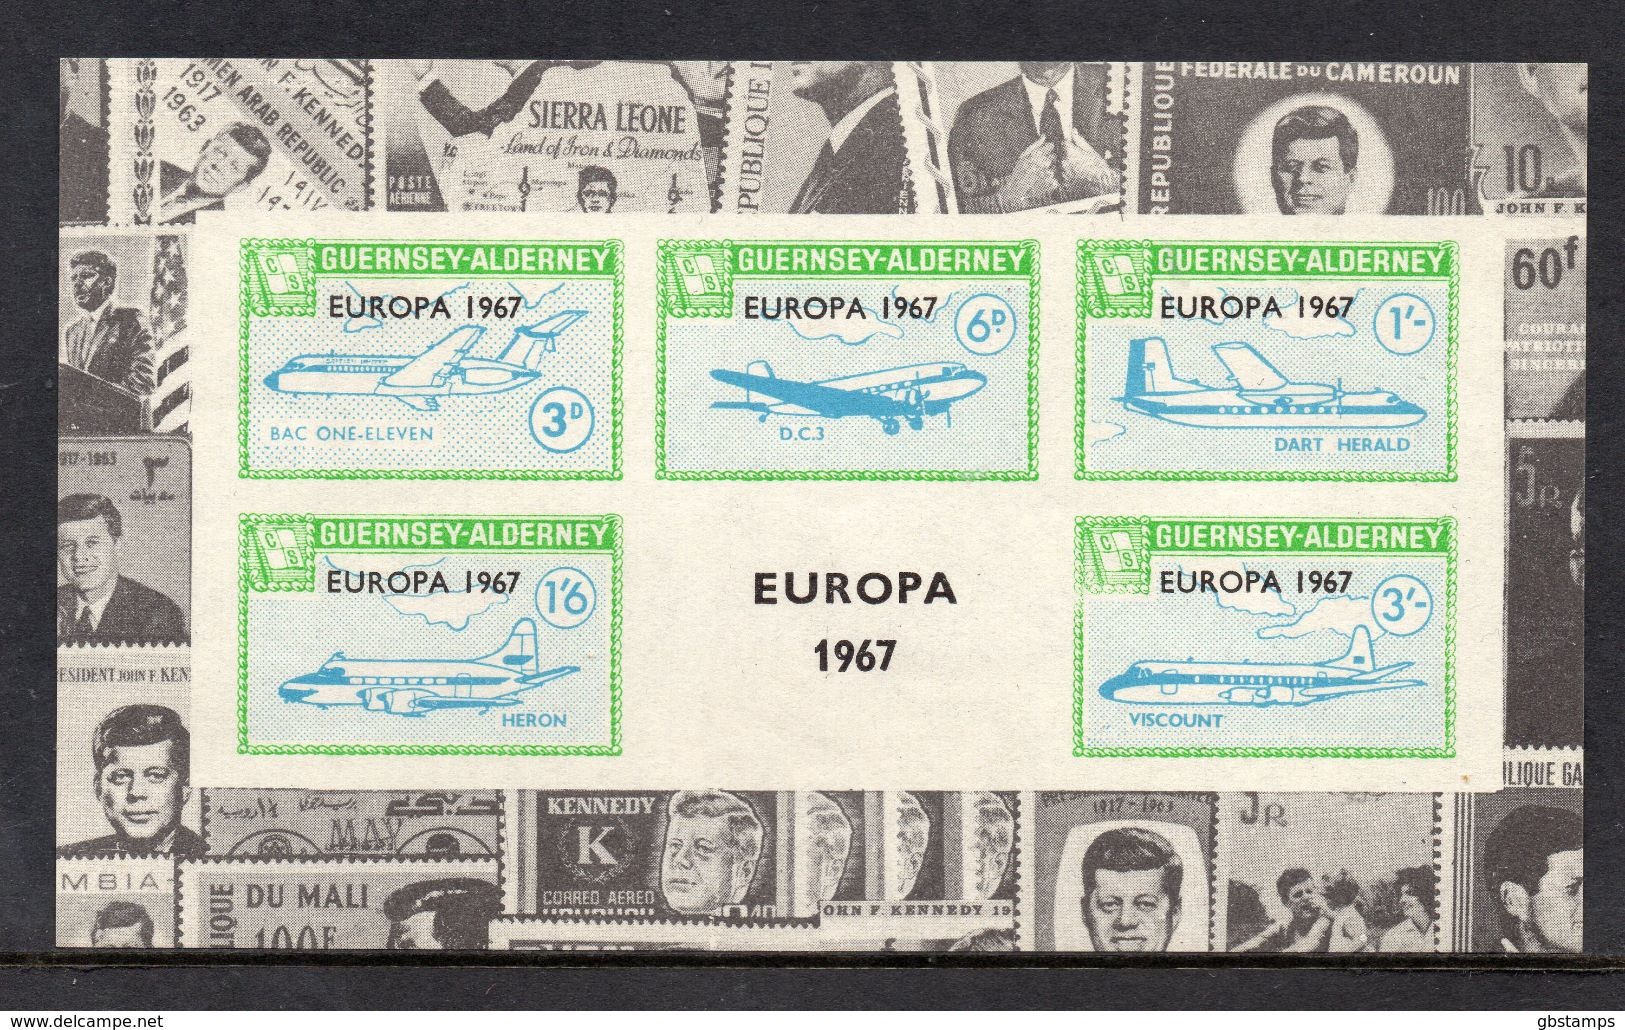 Guernsey Alderney Europa 1967 Imperf Miniature Sheet UM/MNH Featuring Aircraft As Scanned - Emissione Locali